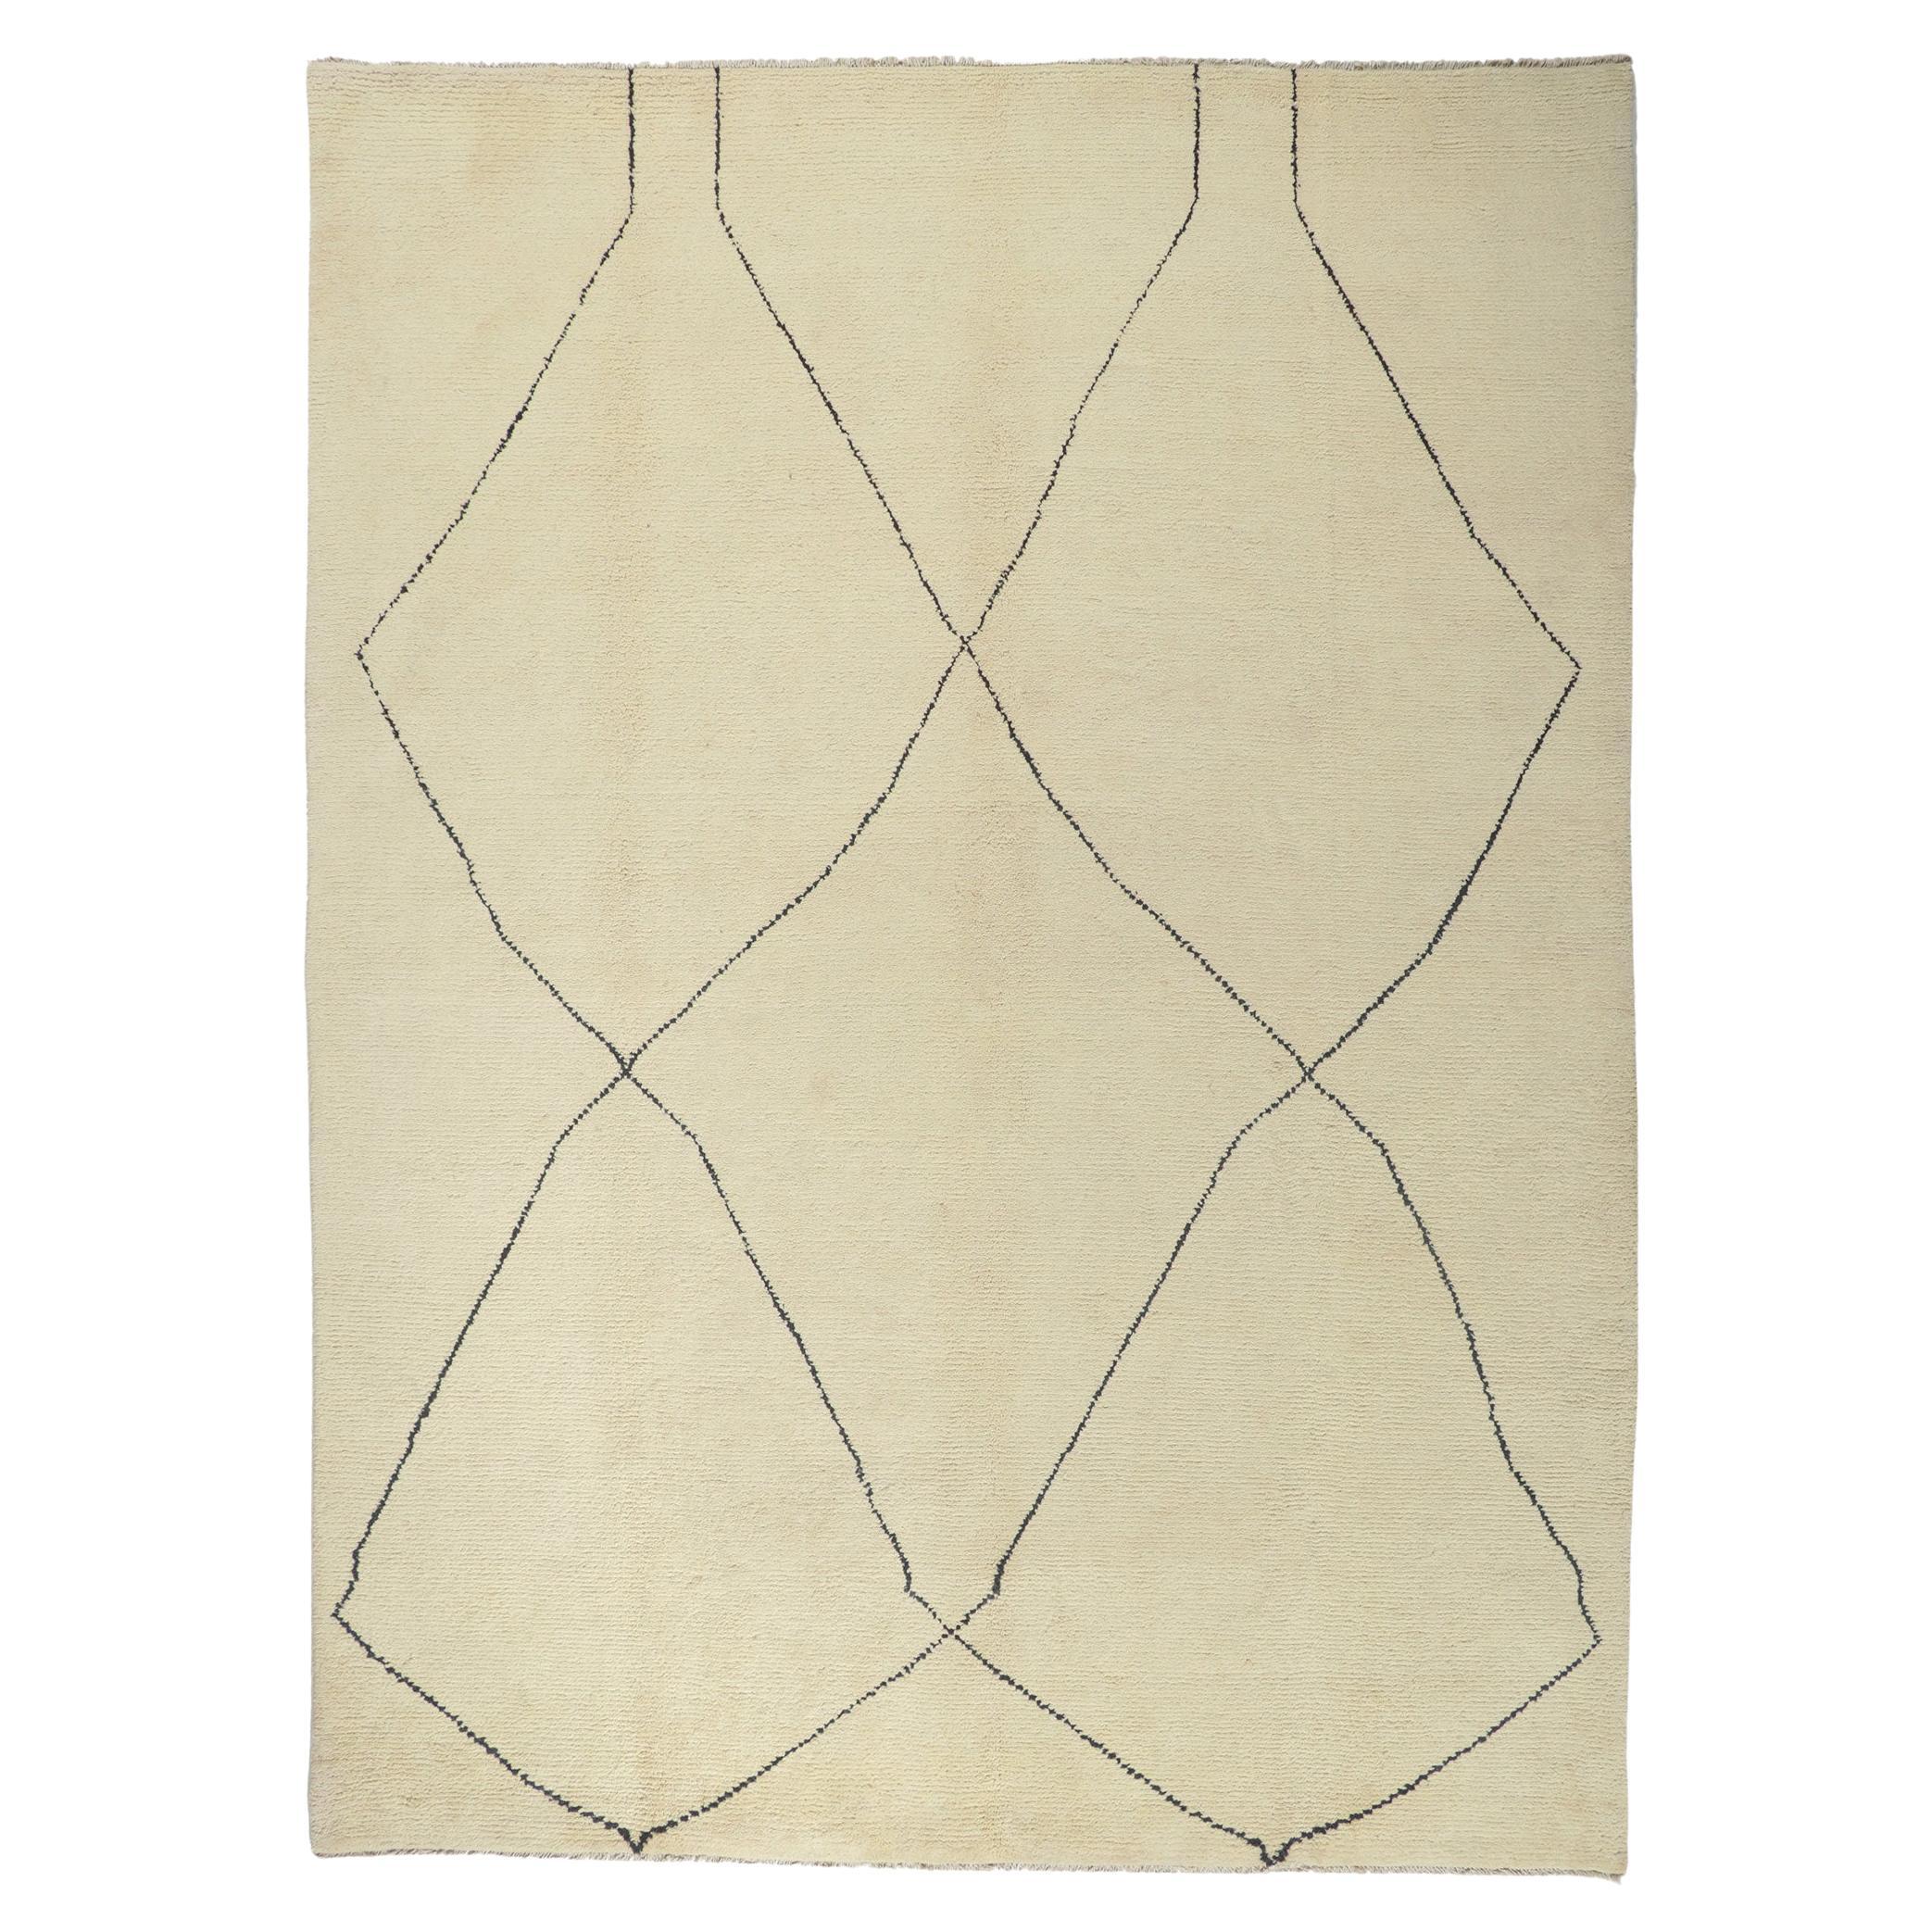 New Large Modern Moroccan Area Rug, Minimalist Style Meets Boho Chic